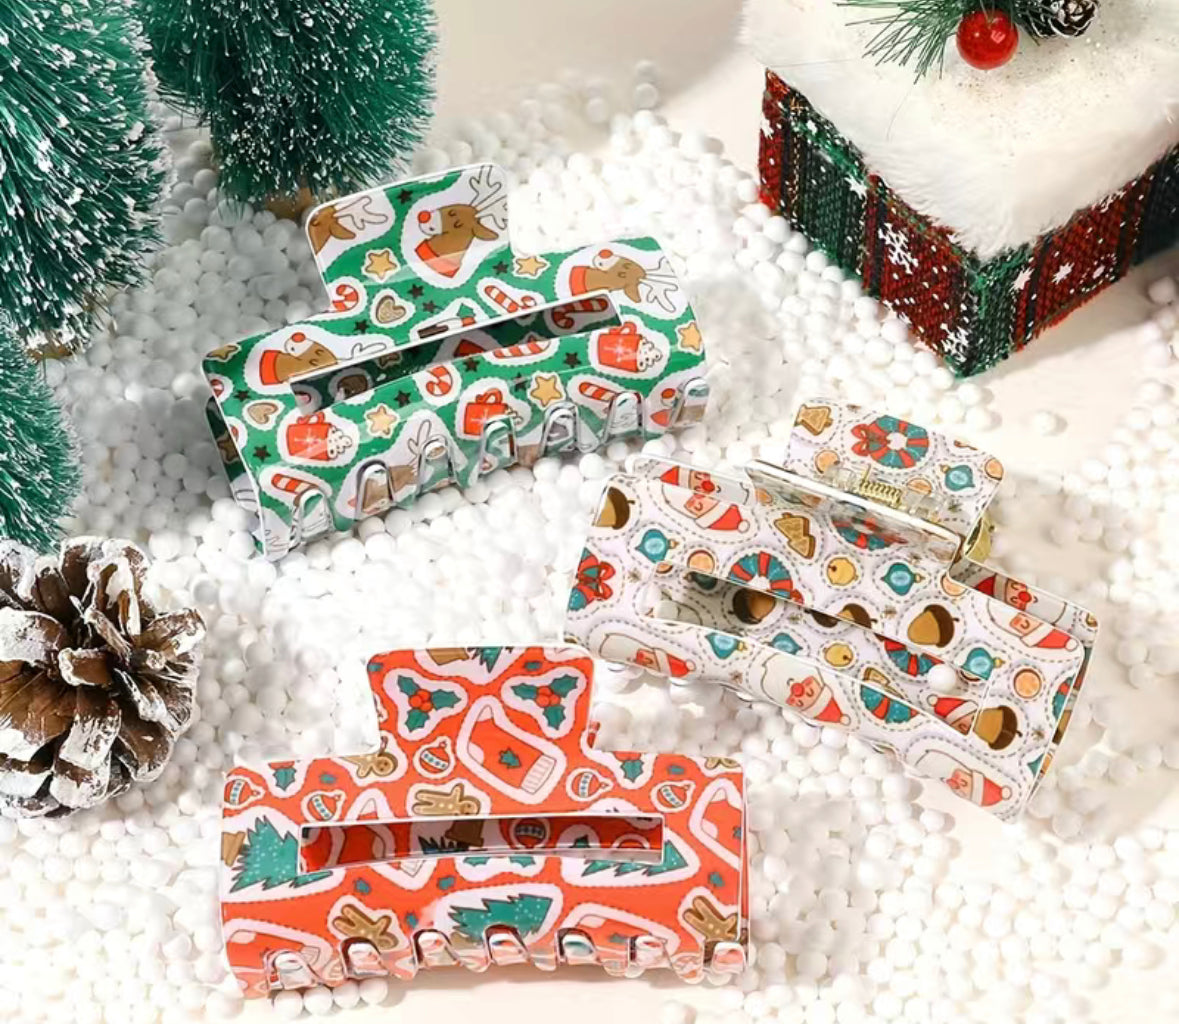 A set of Christmas Clips from Chickie Collective on a snowy surface, beautifully displaying holiday organization.